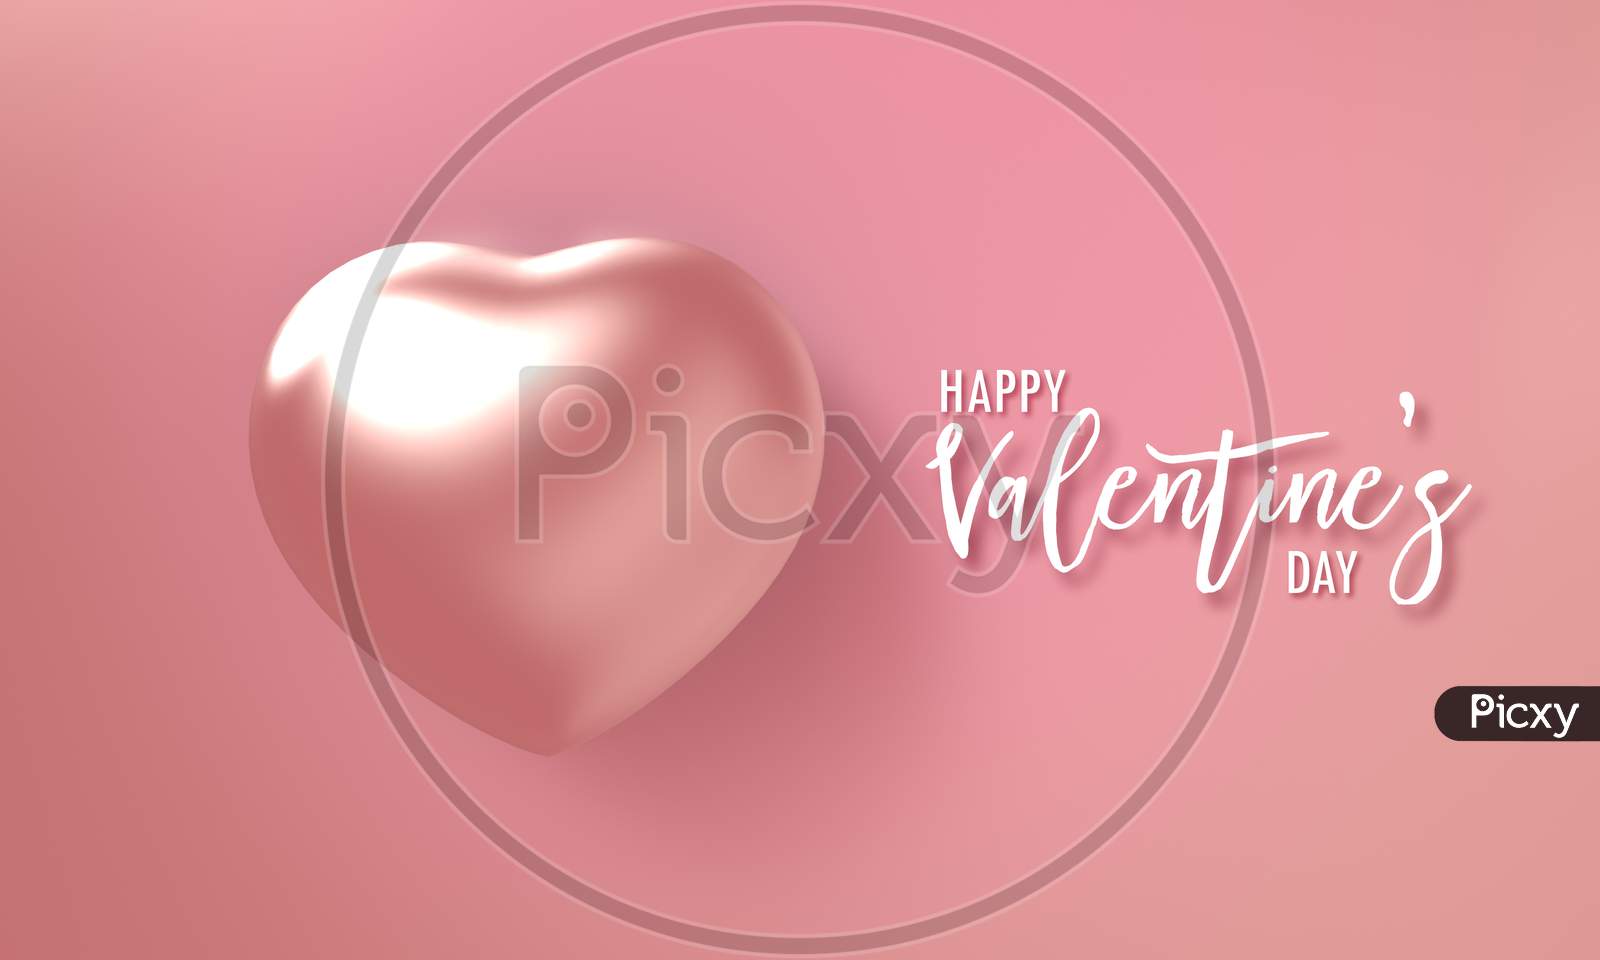 White Happy Valentines Day Text Invitation Card With Diamond Pearl Heart Shape On Pink Pastel Background. Holiday And Affection Love Concept. Greeting Card And Celebration Theme. 3D Illustration